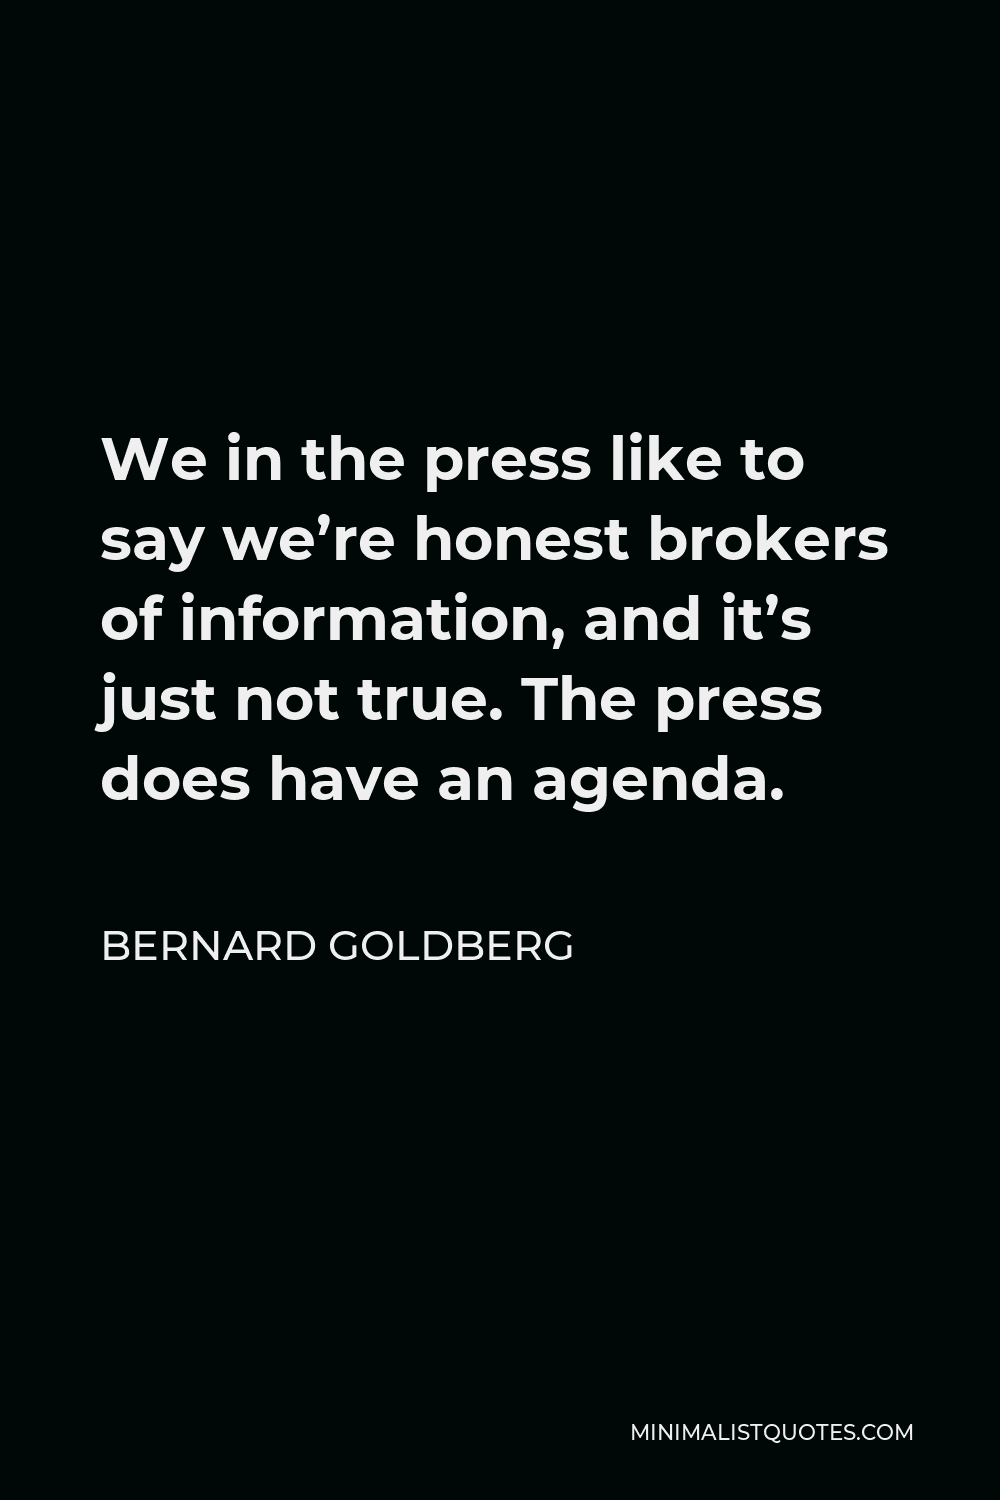 Bernard Goldberg Quote - We in the press like to say we’re honest brokers of information, and it’s just not true. The press does have an agenda.